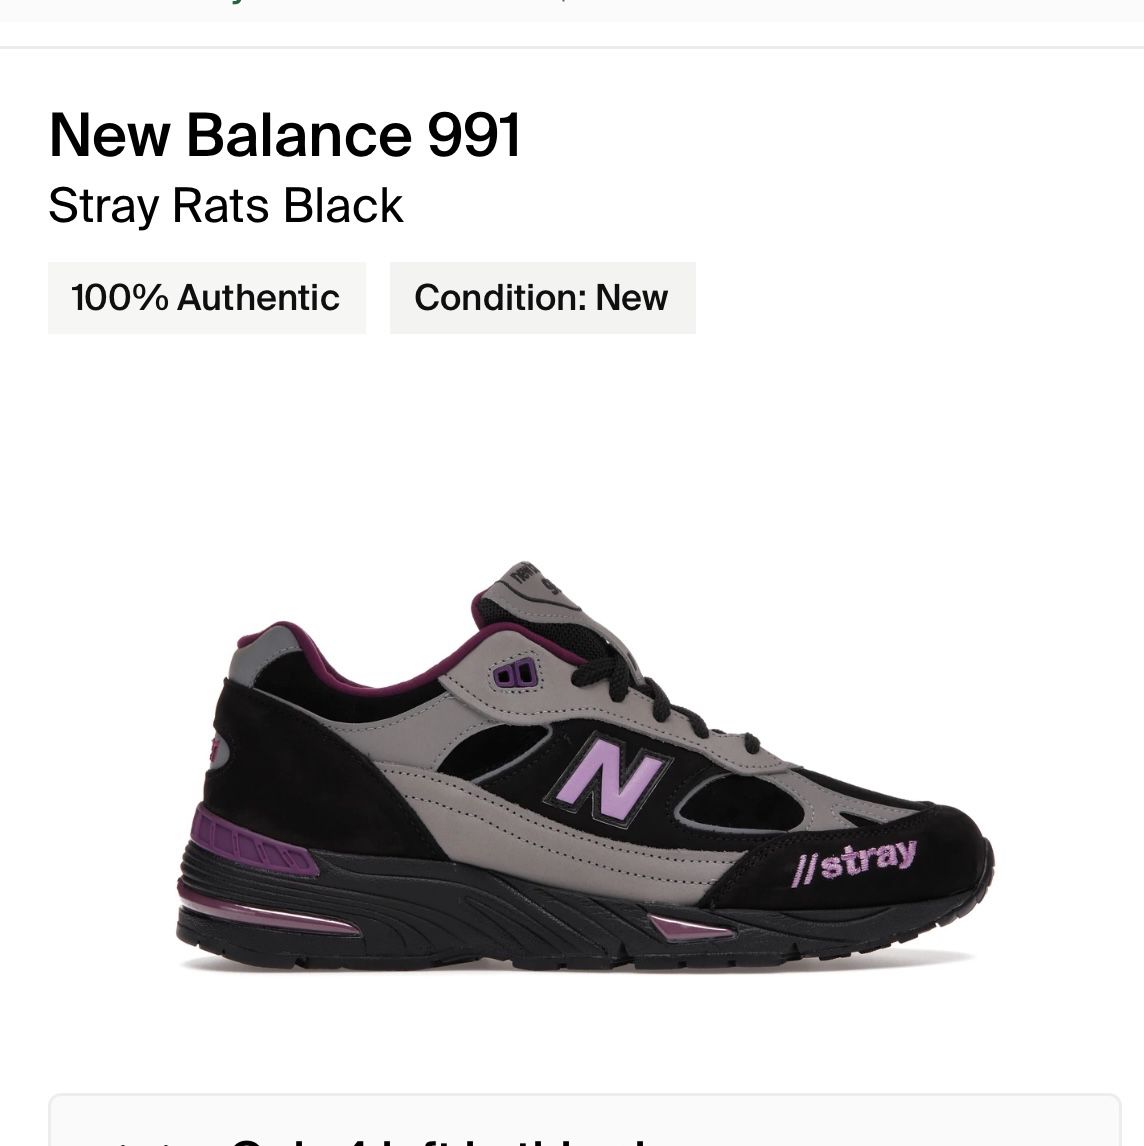 New Balance 991 Stray Rats Black Size 11 for Sale in FL - OfferUp